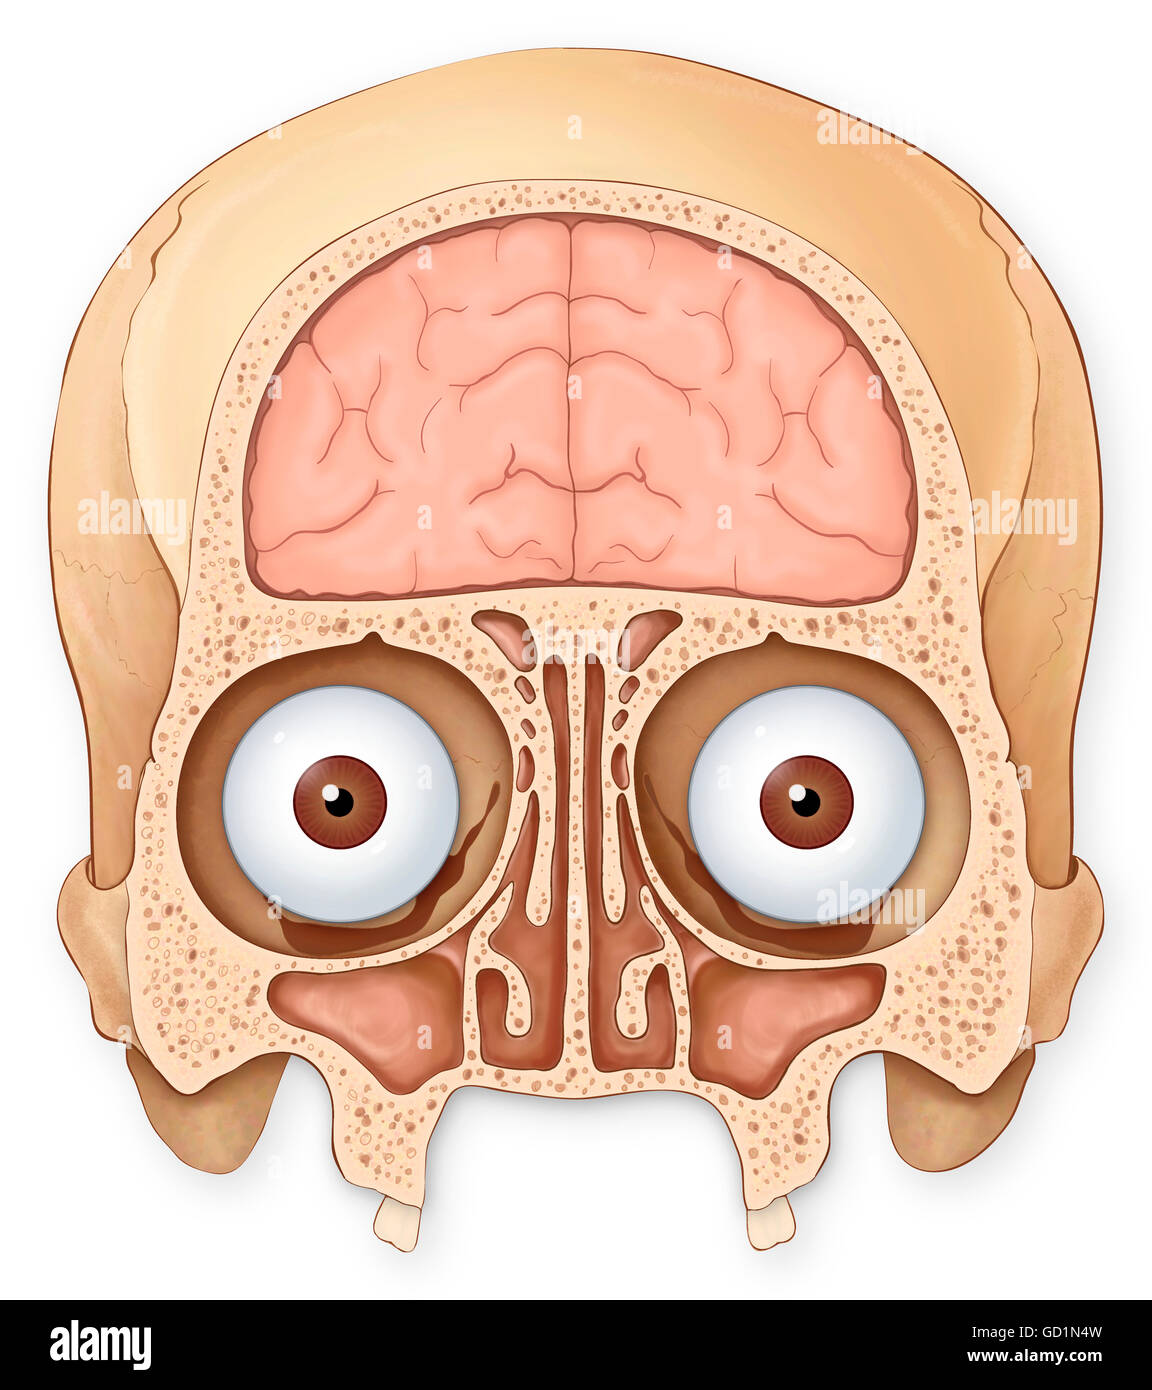 Normal coronal section of the skull and brain showing the coronal sinuses, frontal lobe of the brain, eyes and eye sockets Stock Photo